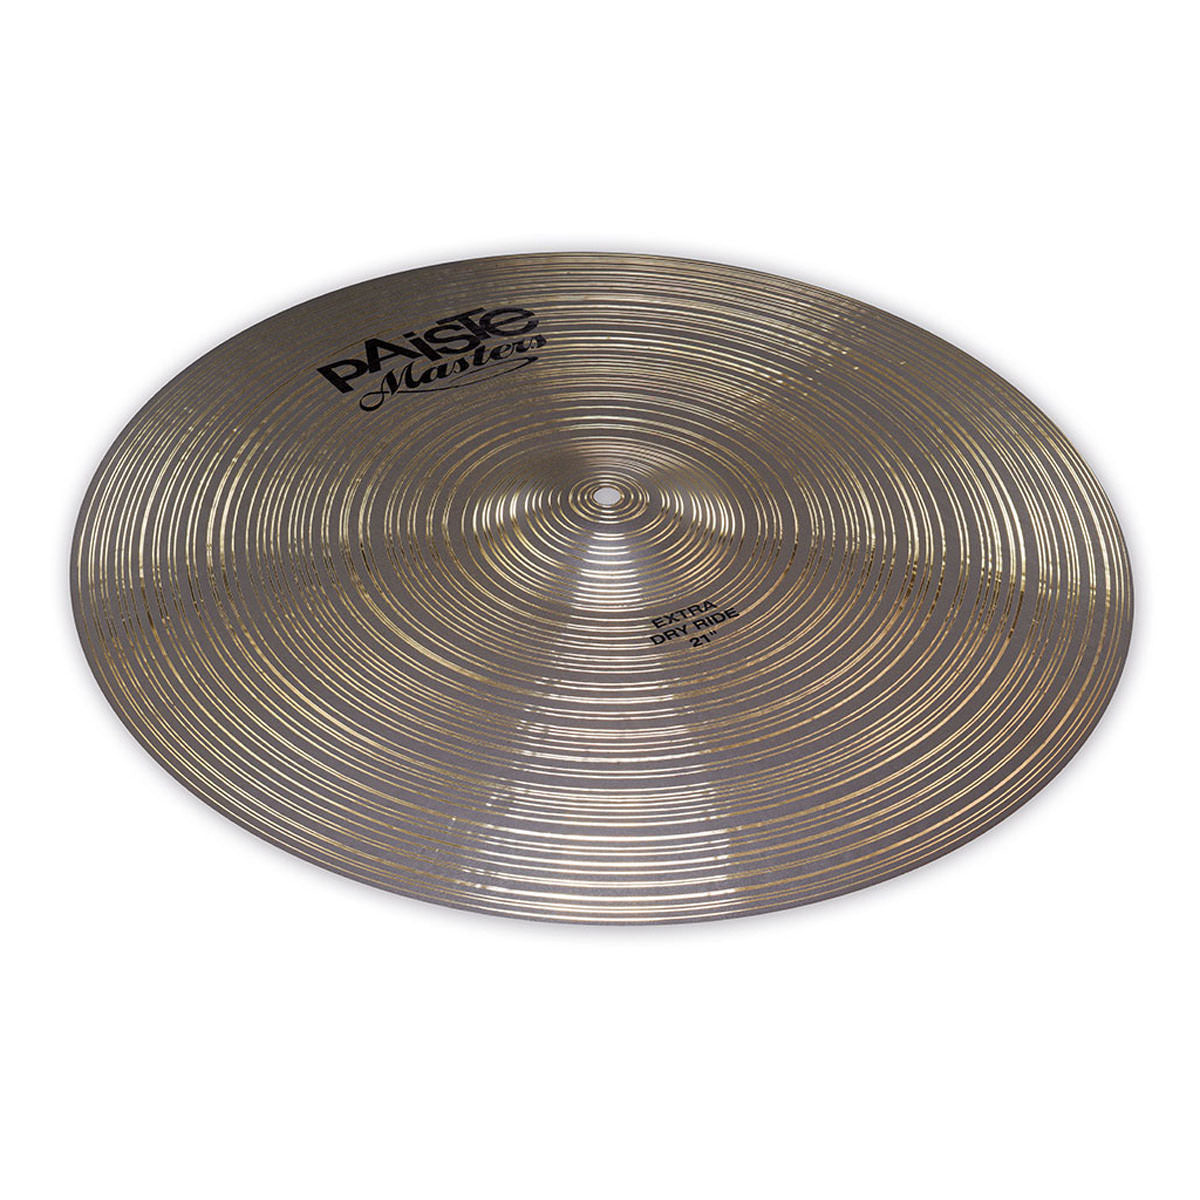 Paiste Masters Collection 21" Extra Dry Ride